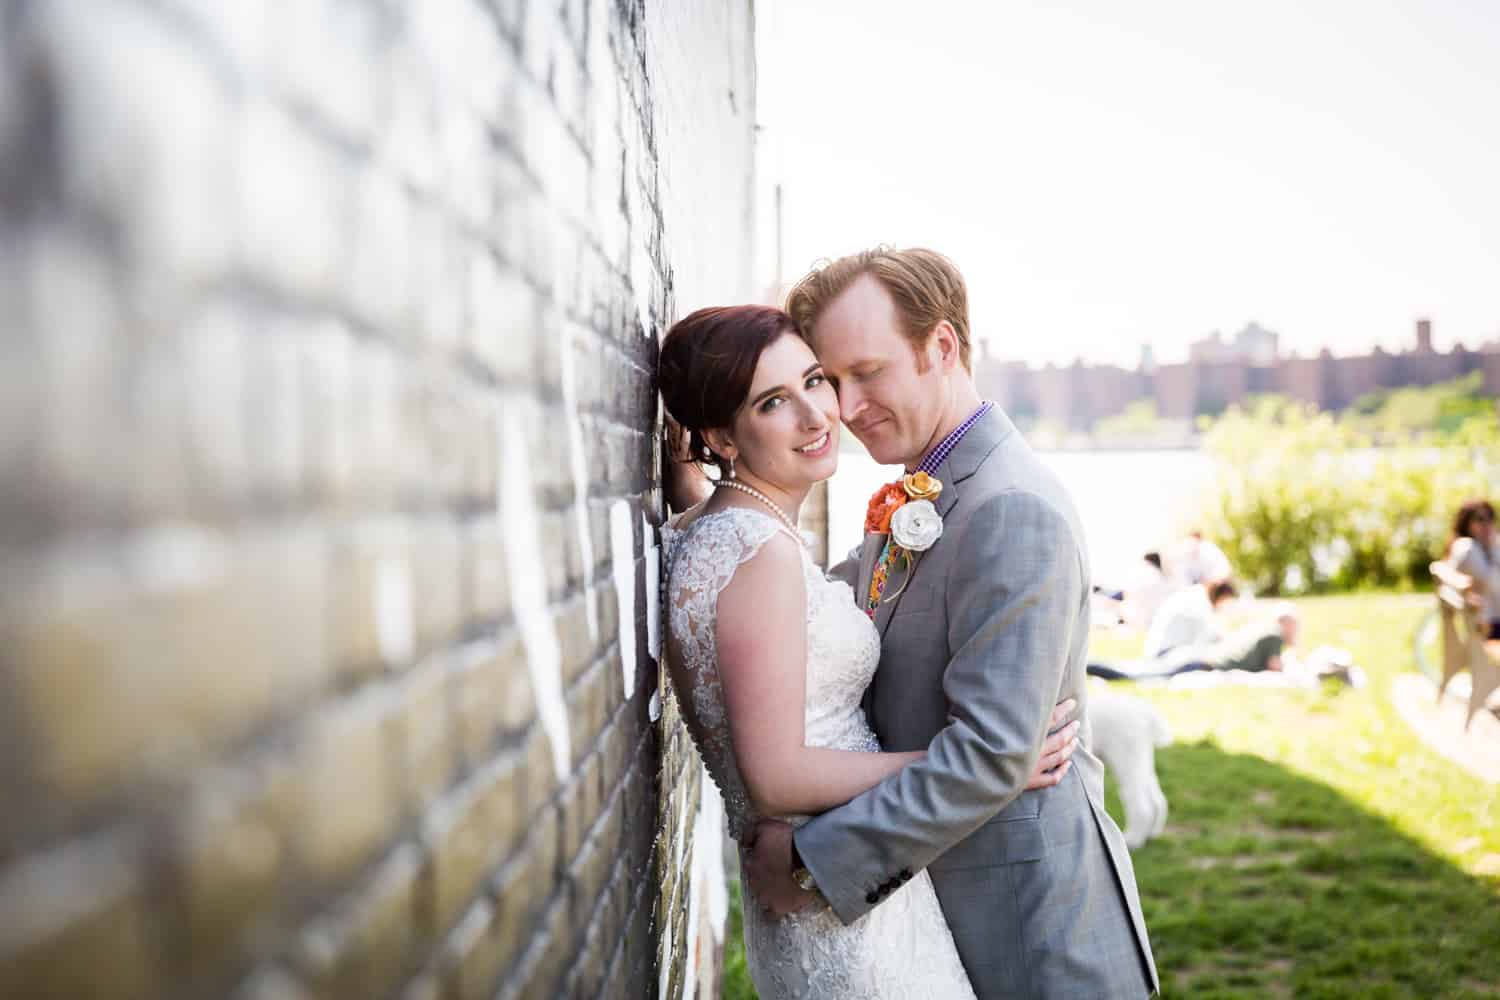 Bride and groom leaning against brick wall at a Greenpoint Loft wedding